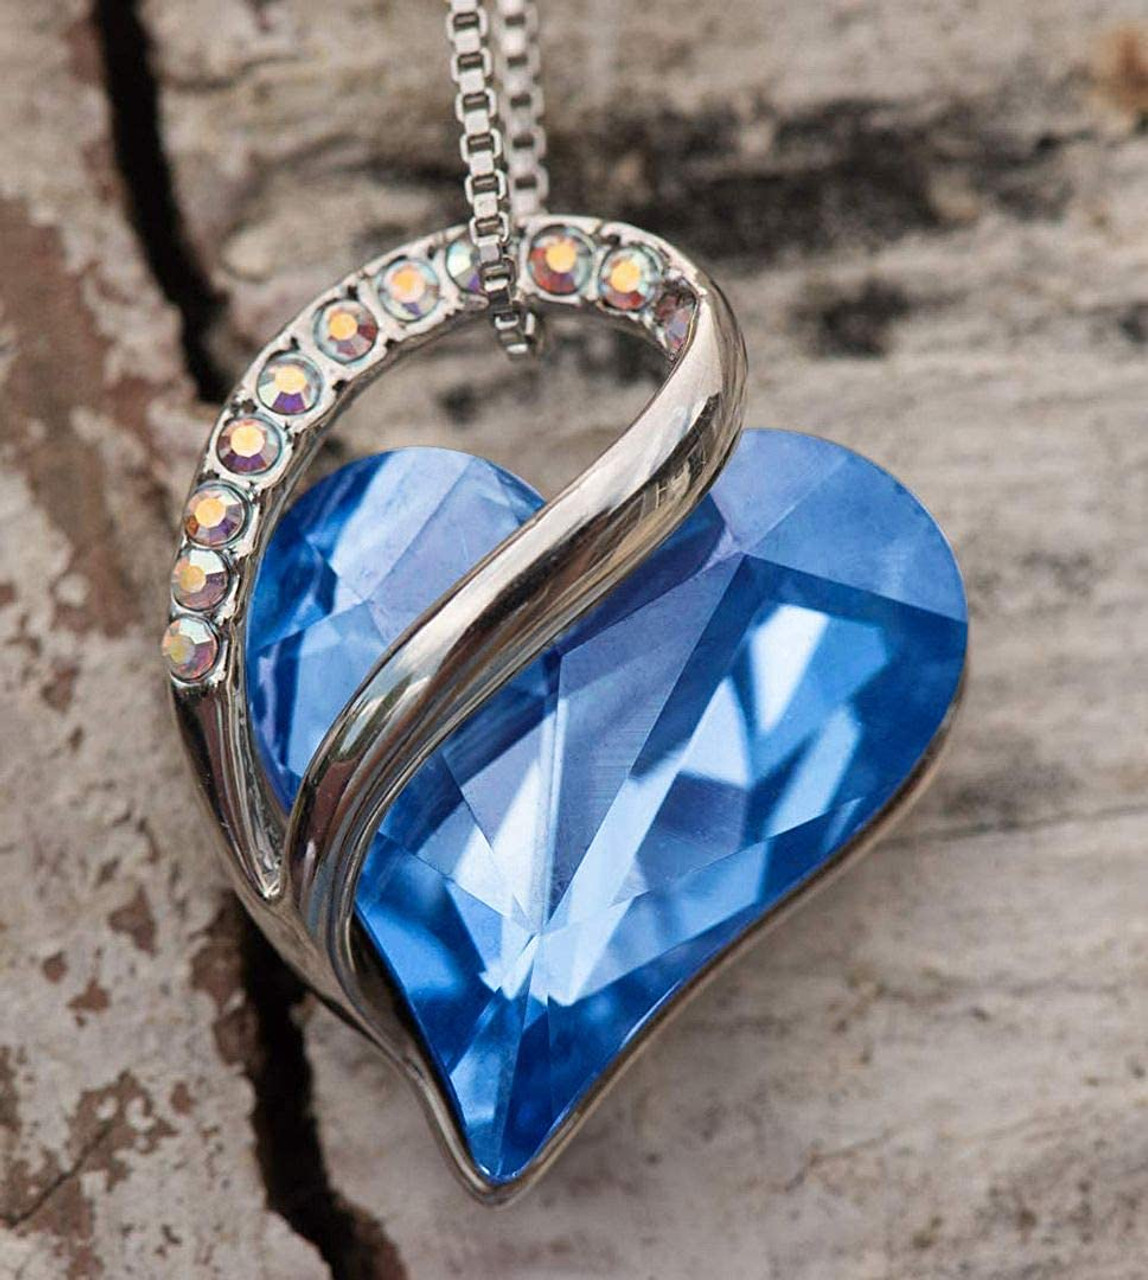 December Birthstone - Sky Light Blue Sapphire Looped Heart Design Crystal Pendant and CZ stones - with 18" Chain Necklace. Gift for Lover, Girl Friend, Wife, Valentine's Day Gift, Mother's Day, Anniversary Gift Heart Necklace.